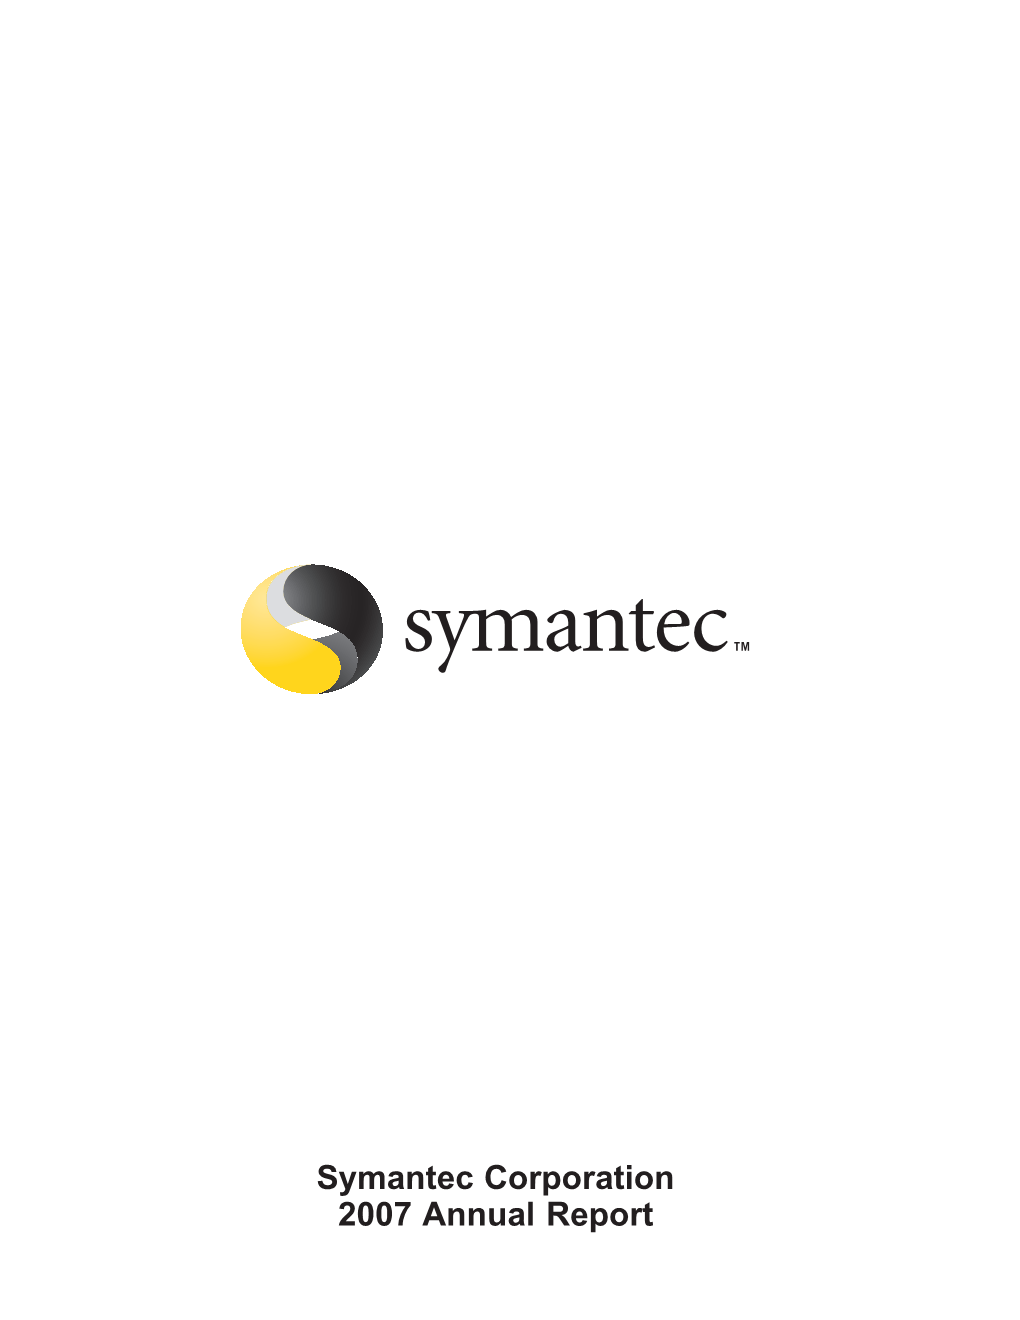 Symantec Corporation 2007 Annual Report TWO YEAR SUMMARY of FINANCIAL RESULTS RECONCILIATION of GAAP to NON-GAAP FINANCIALS